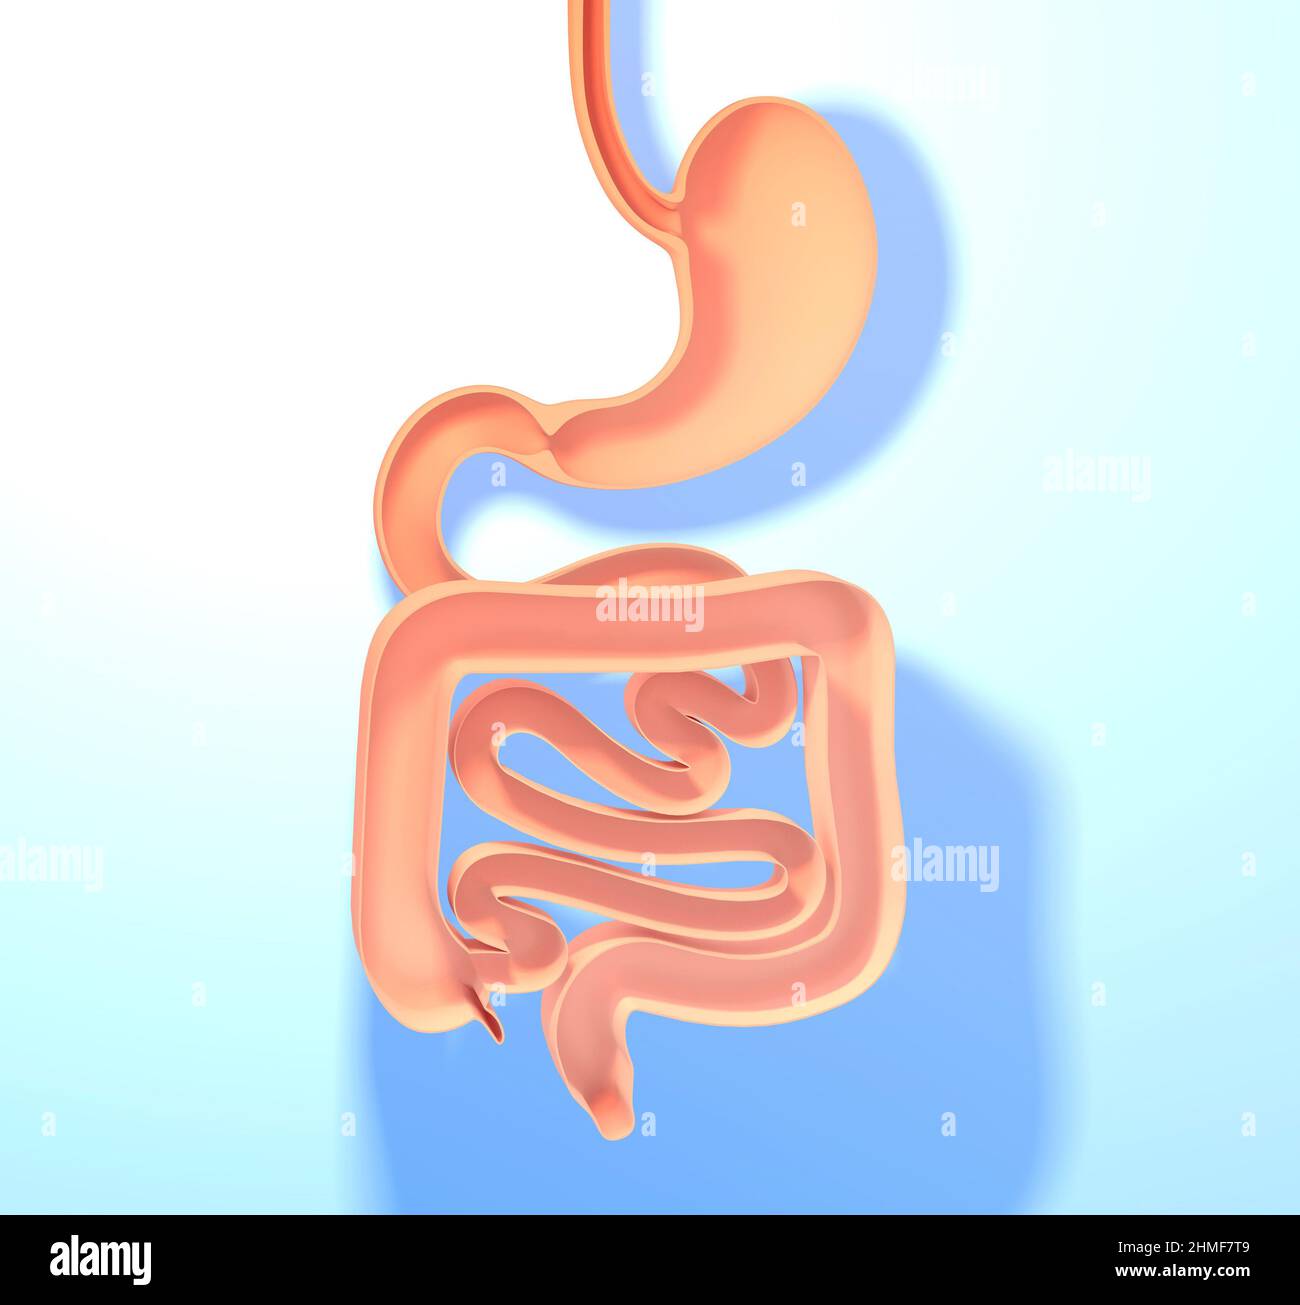 Anatomical 3d illustration of the digestive system. Stomach, large and small intestine. Showing the open interior. Stock Photo